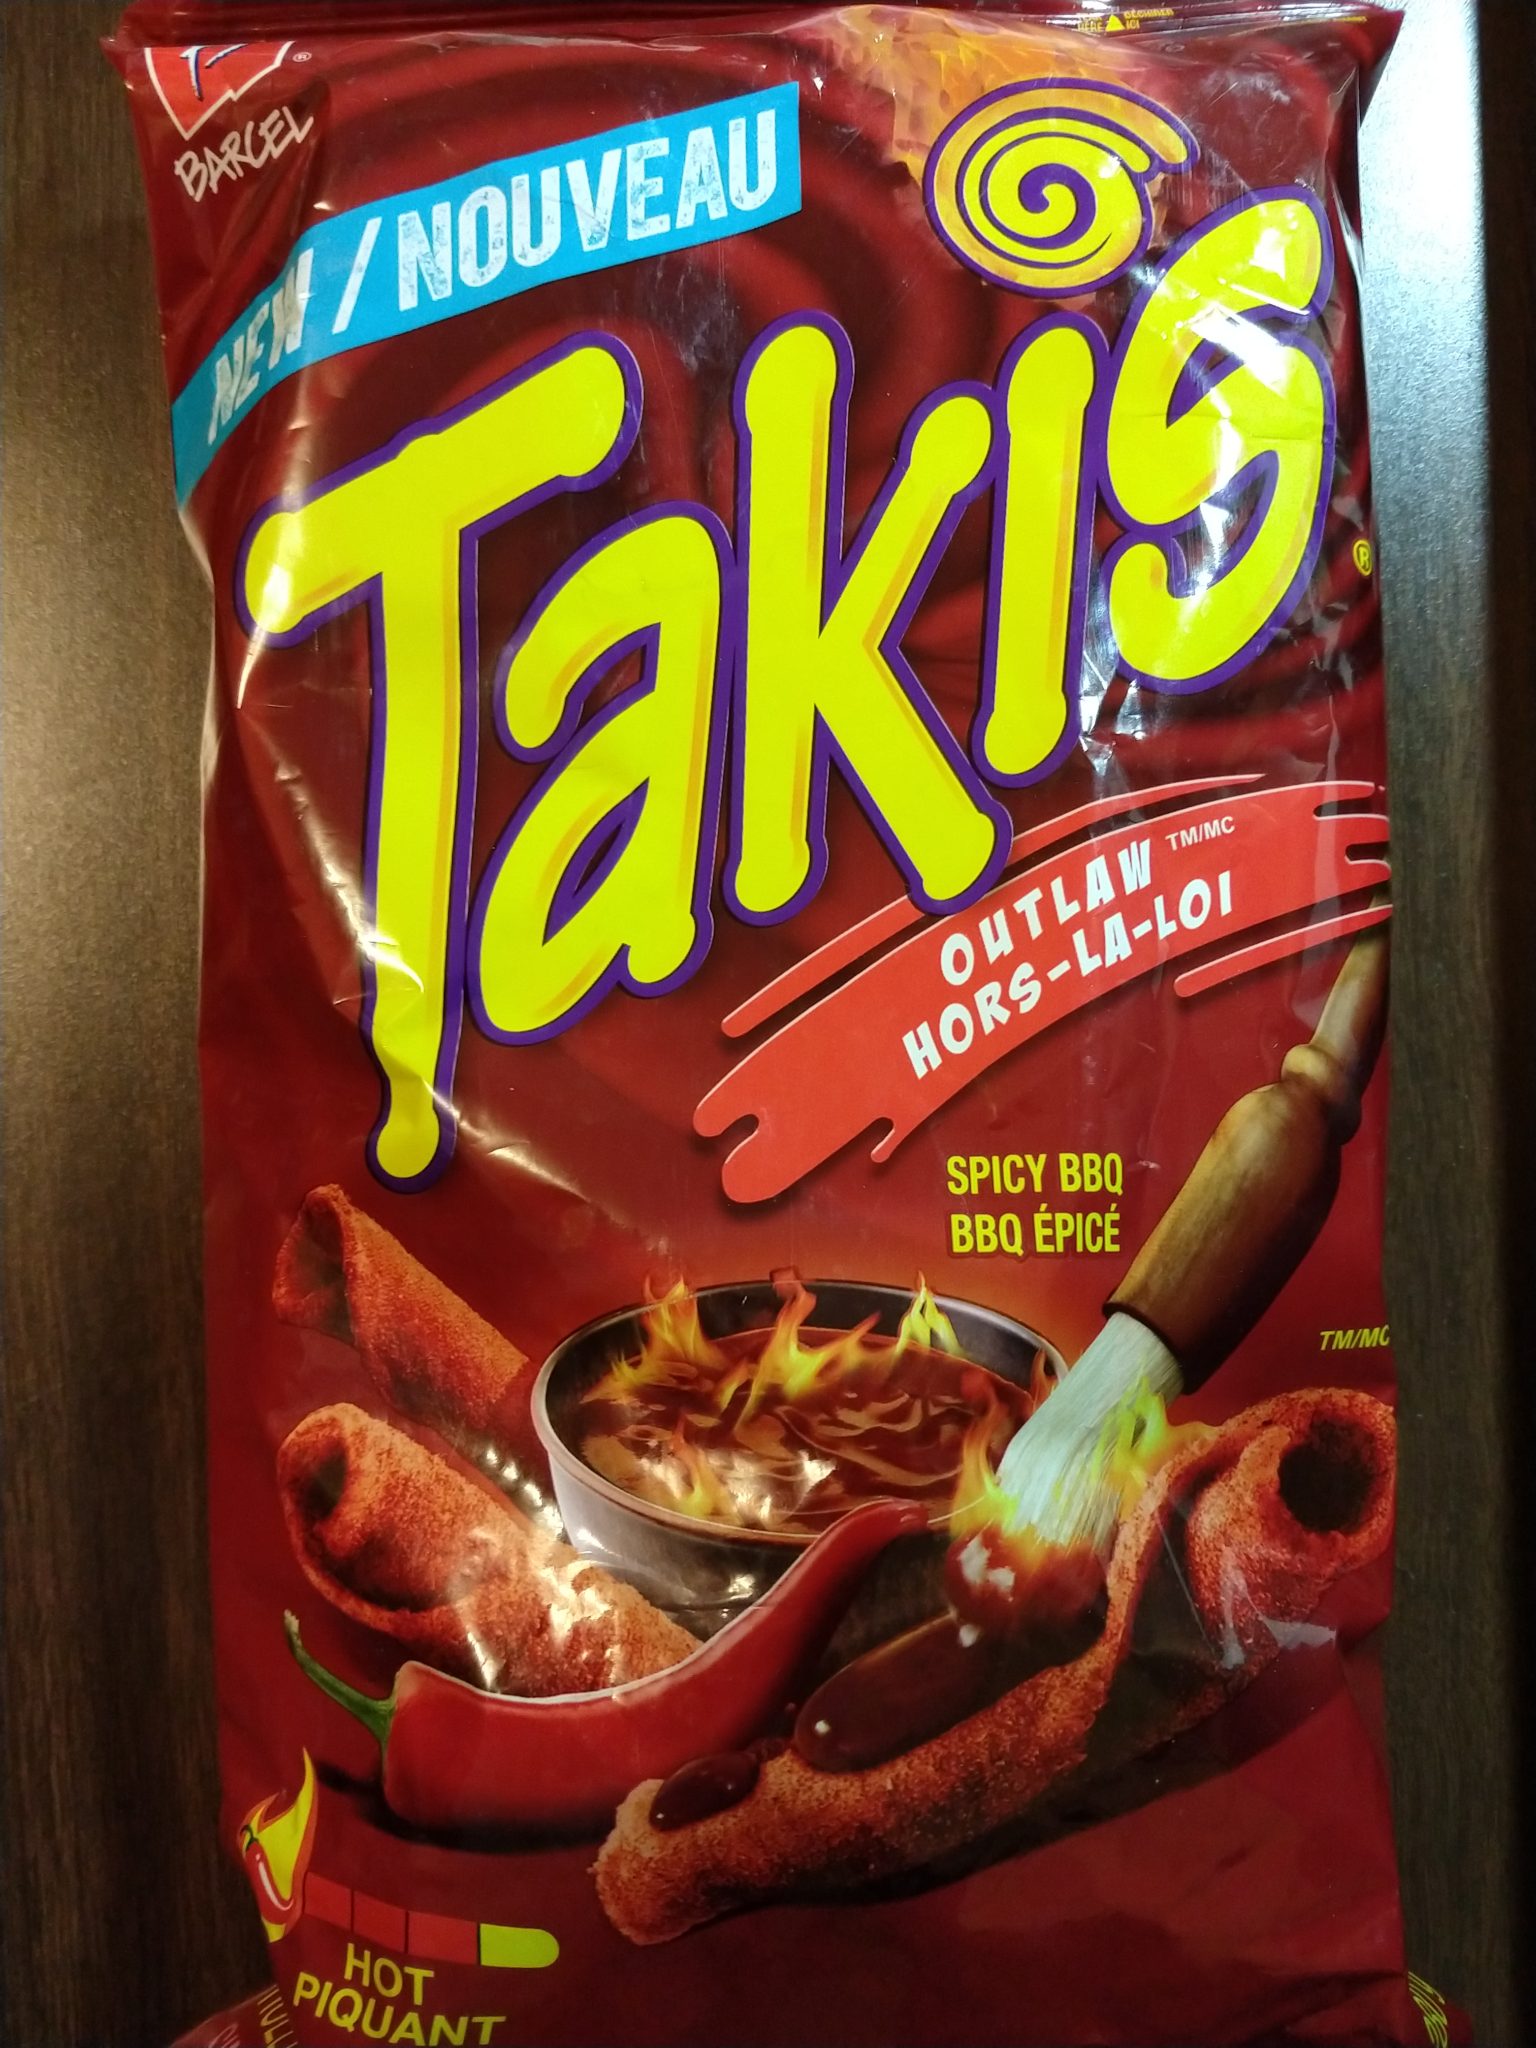 Takis – Outlaw Spicy BBQ